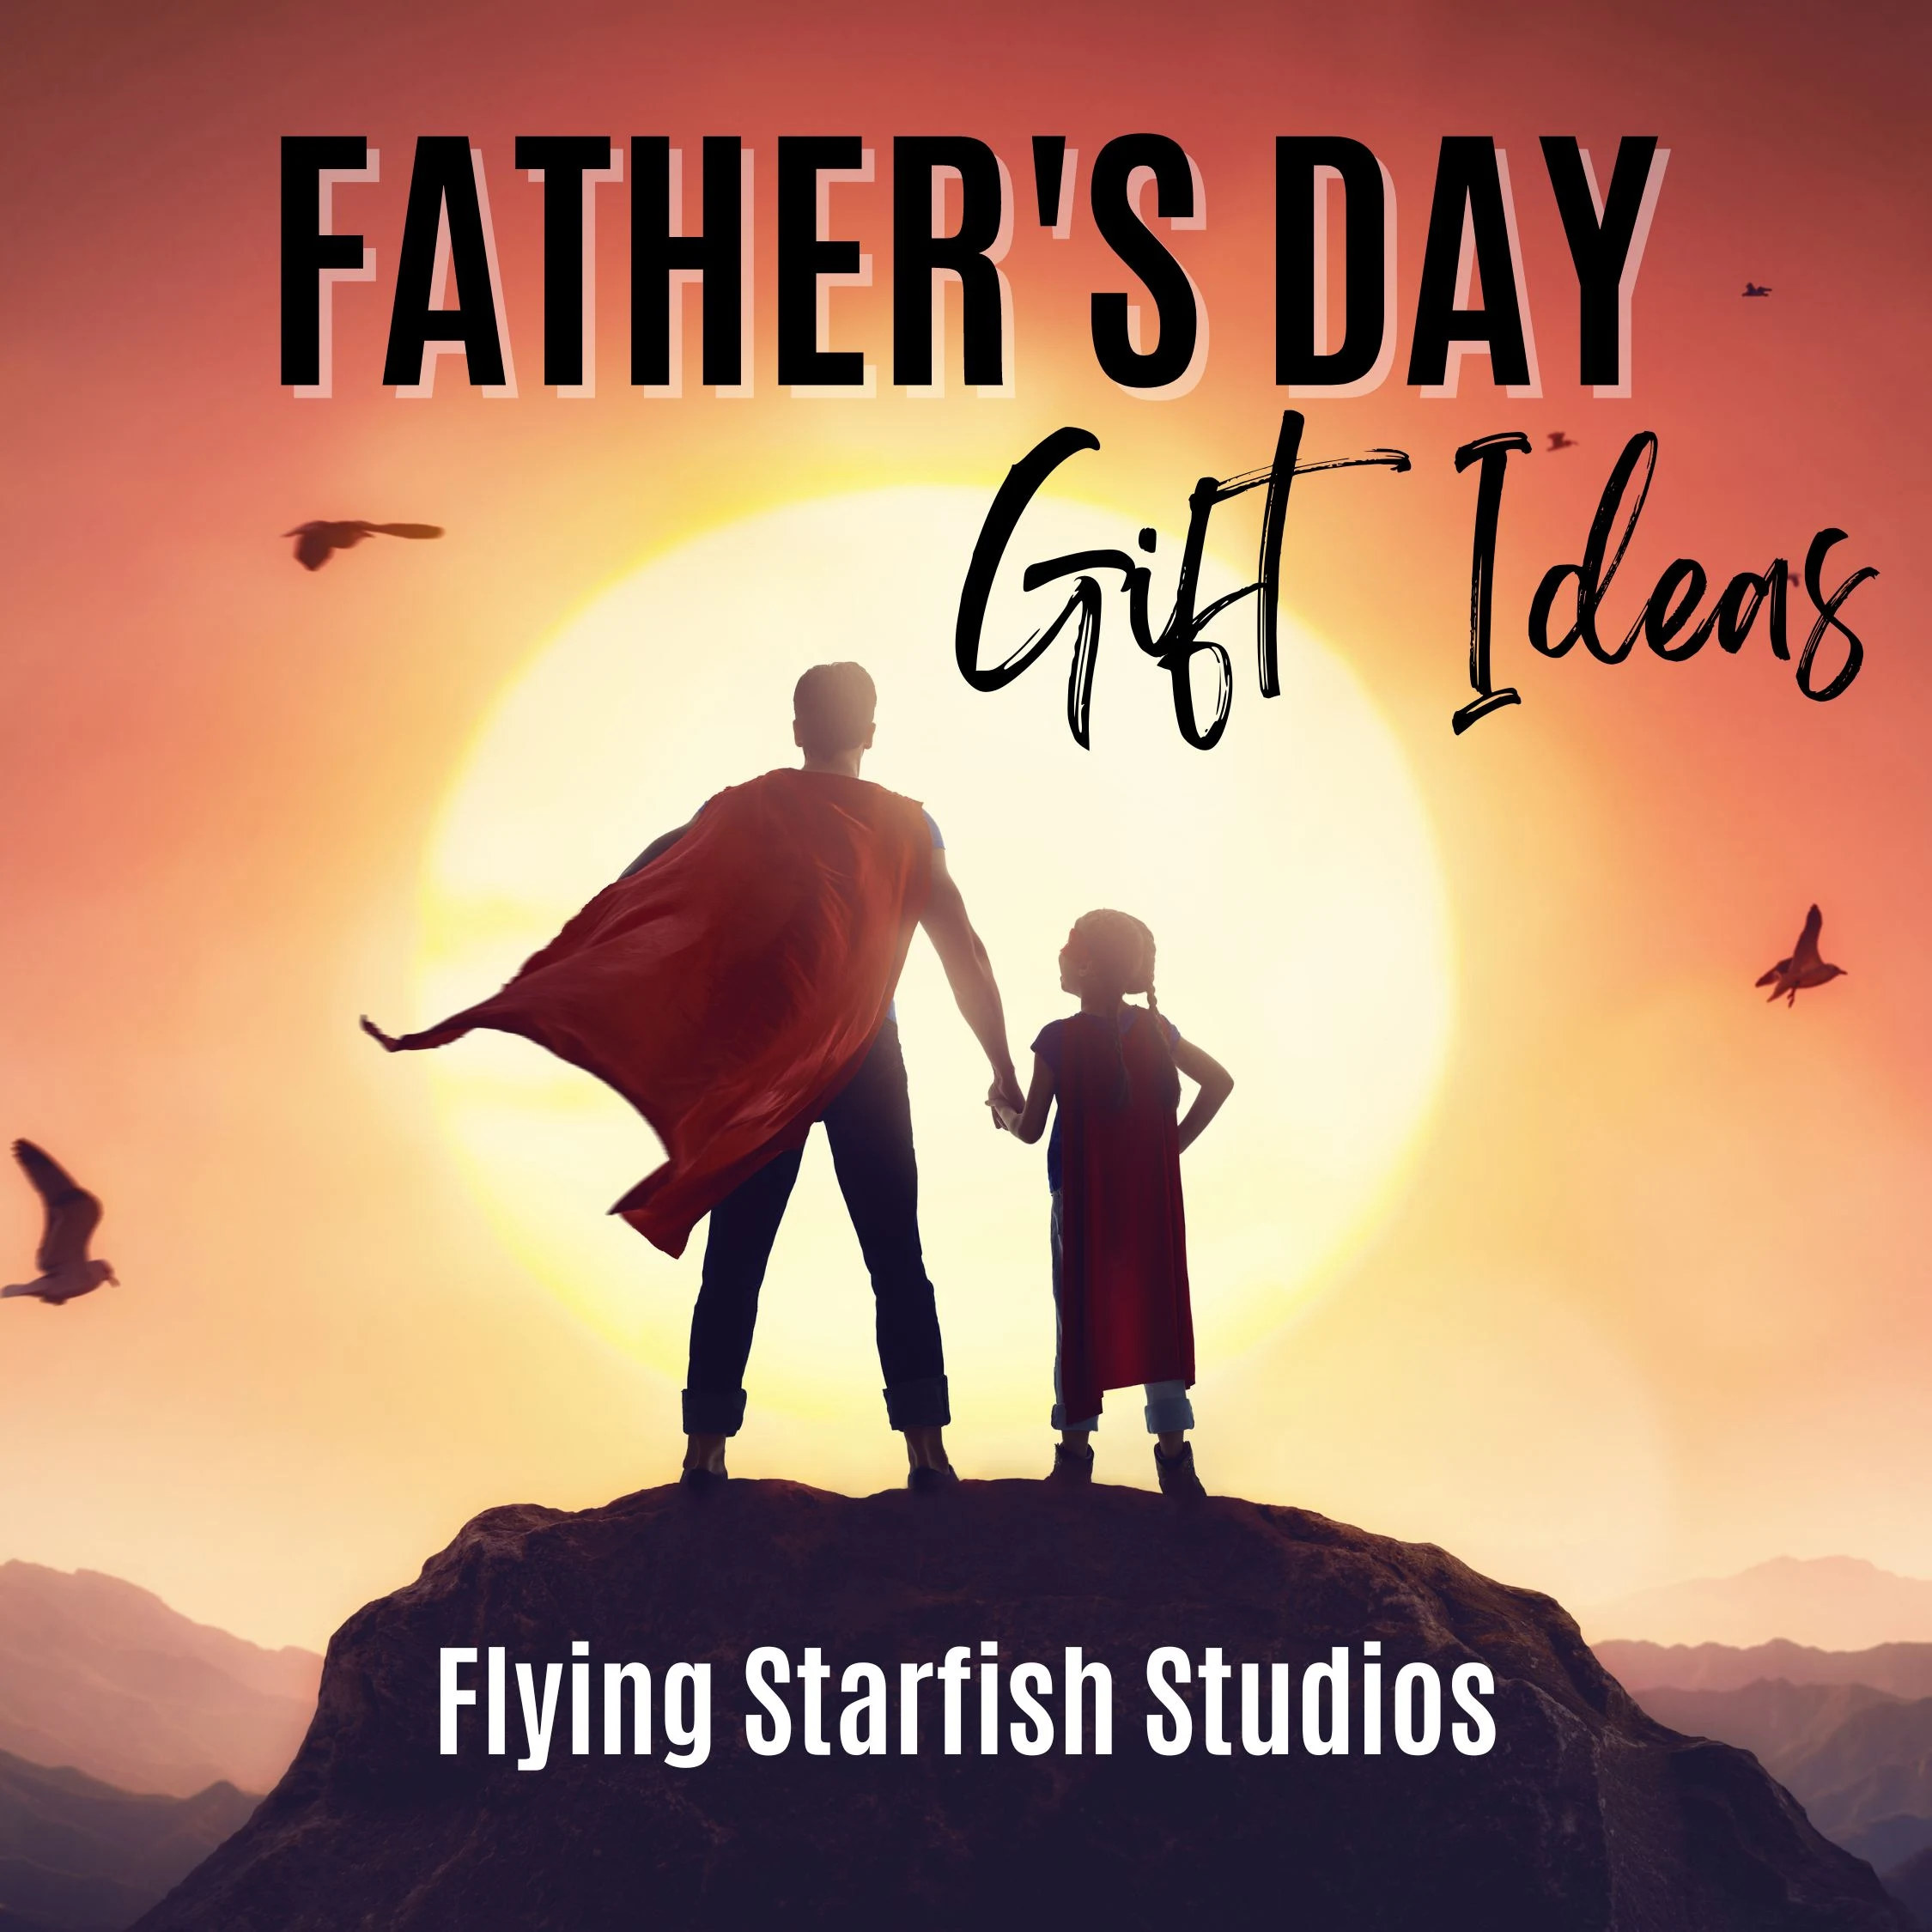 10 Unique Father's Day Gift Ideas: Thoughtful and Practical